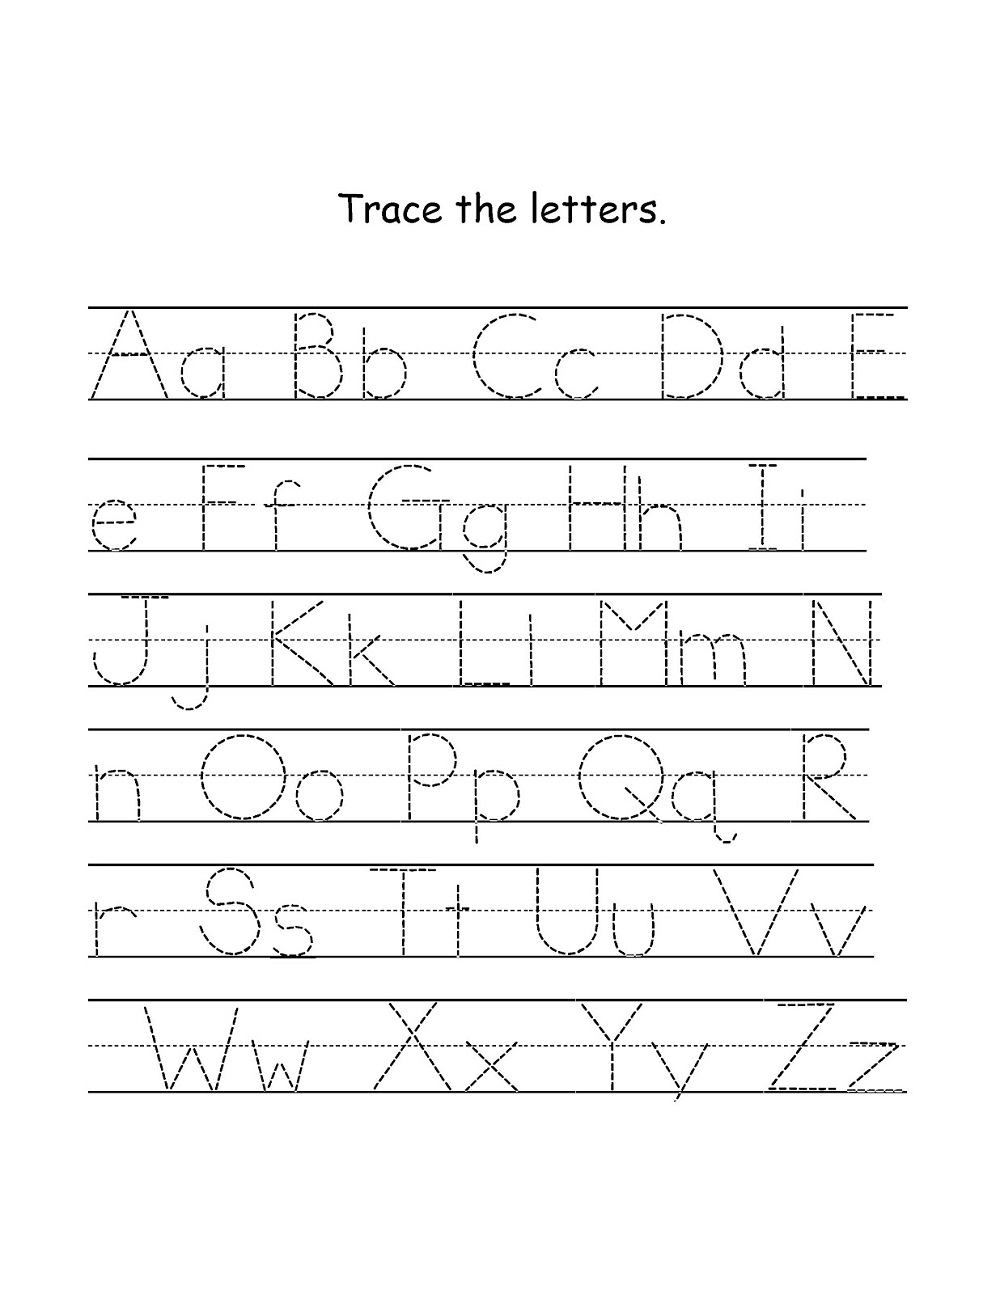 Traceable Alphabet Worksheets A-Z | Activity Shelter throughout A-Z Alphabet Tracing